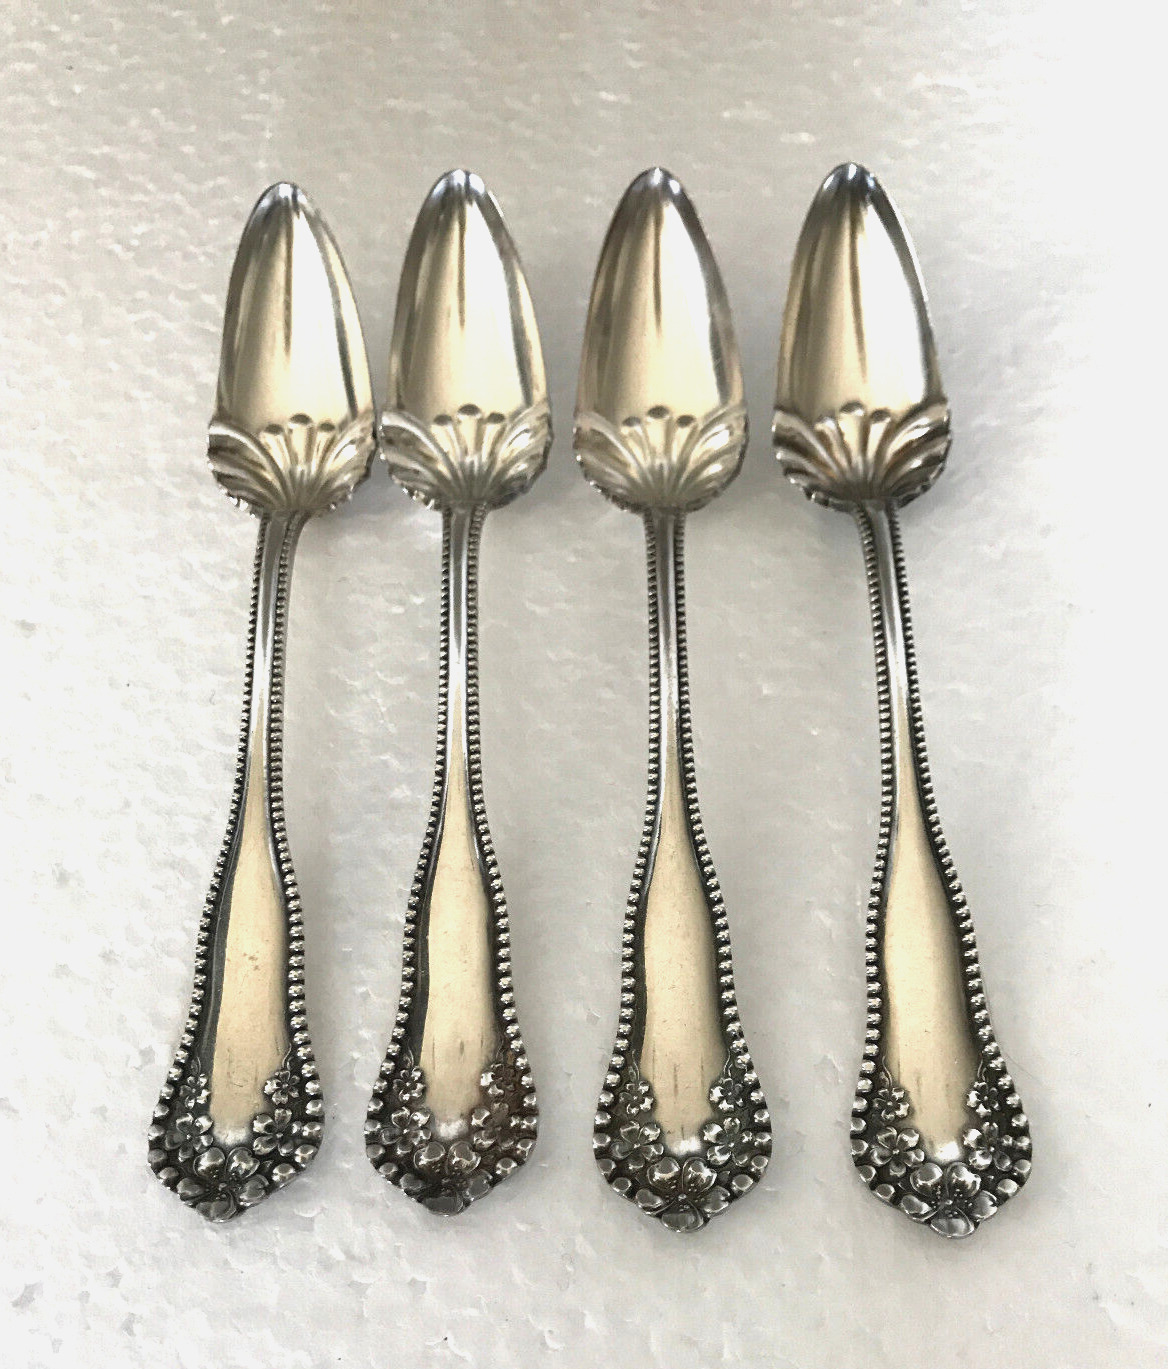 Anchor Rogers MAYFLOWER Silverplate 1901 Fruit Spoons 5 3/4